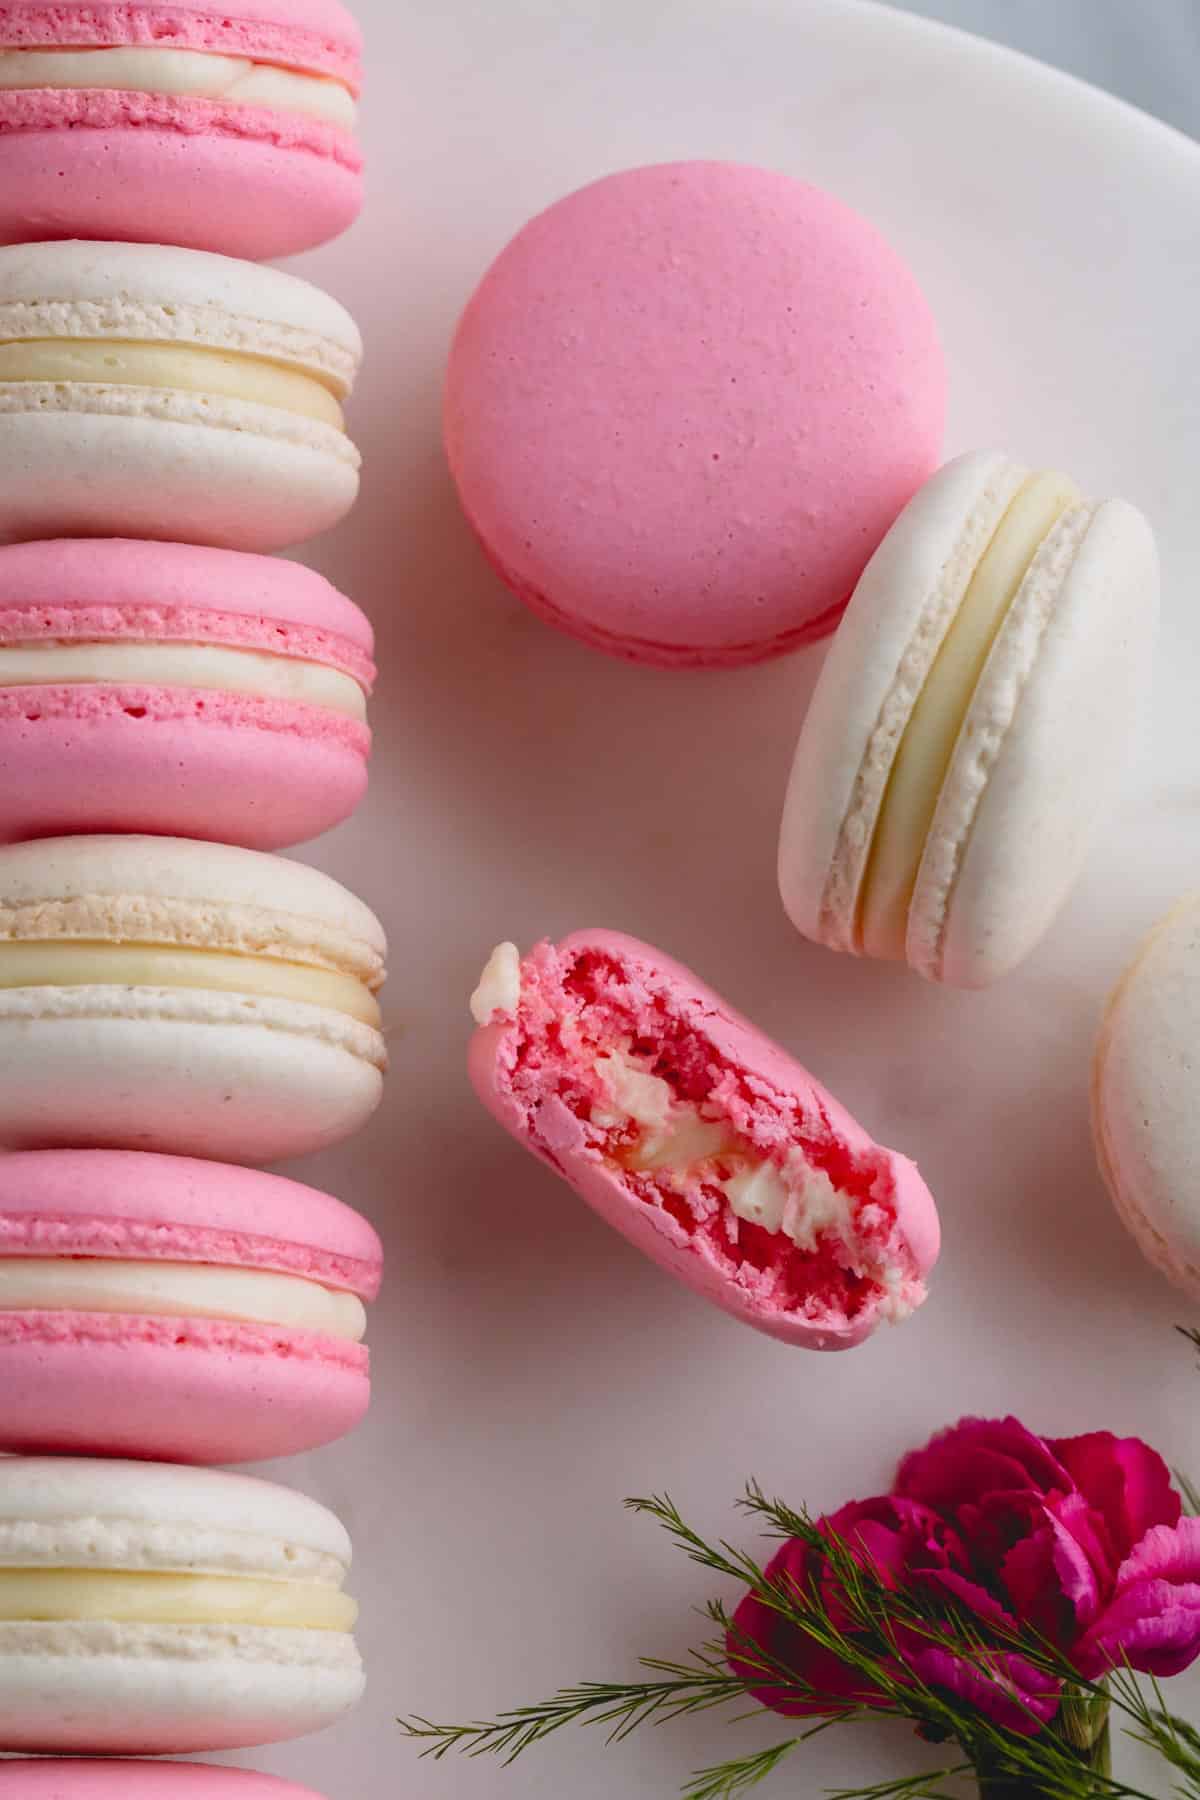 White and pink macarons with one macaron has a bite out.